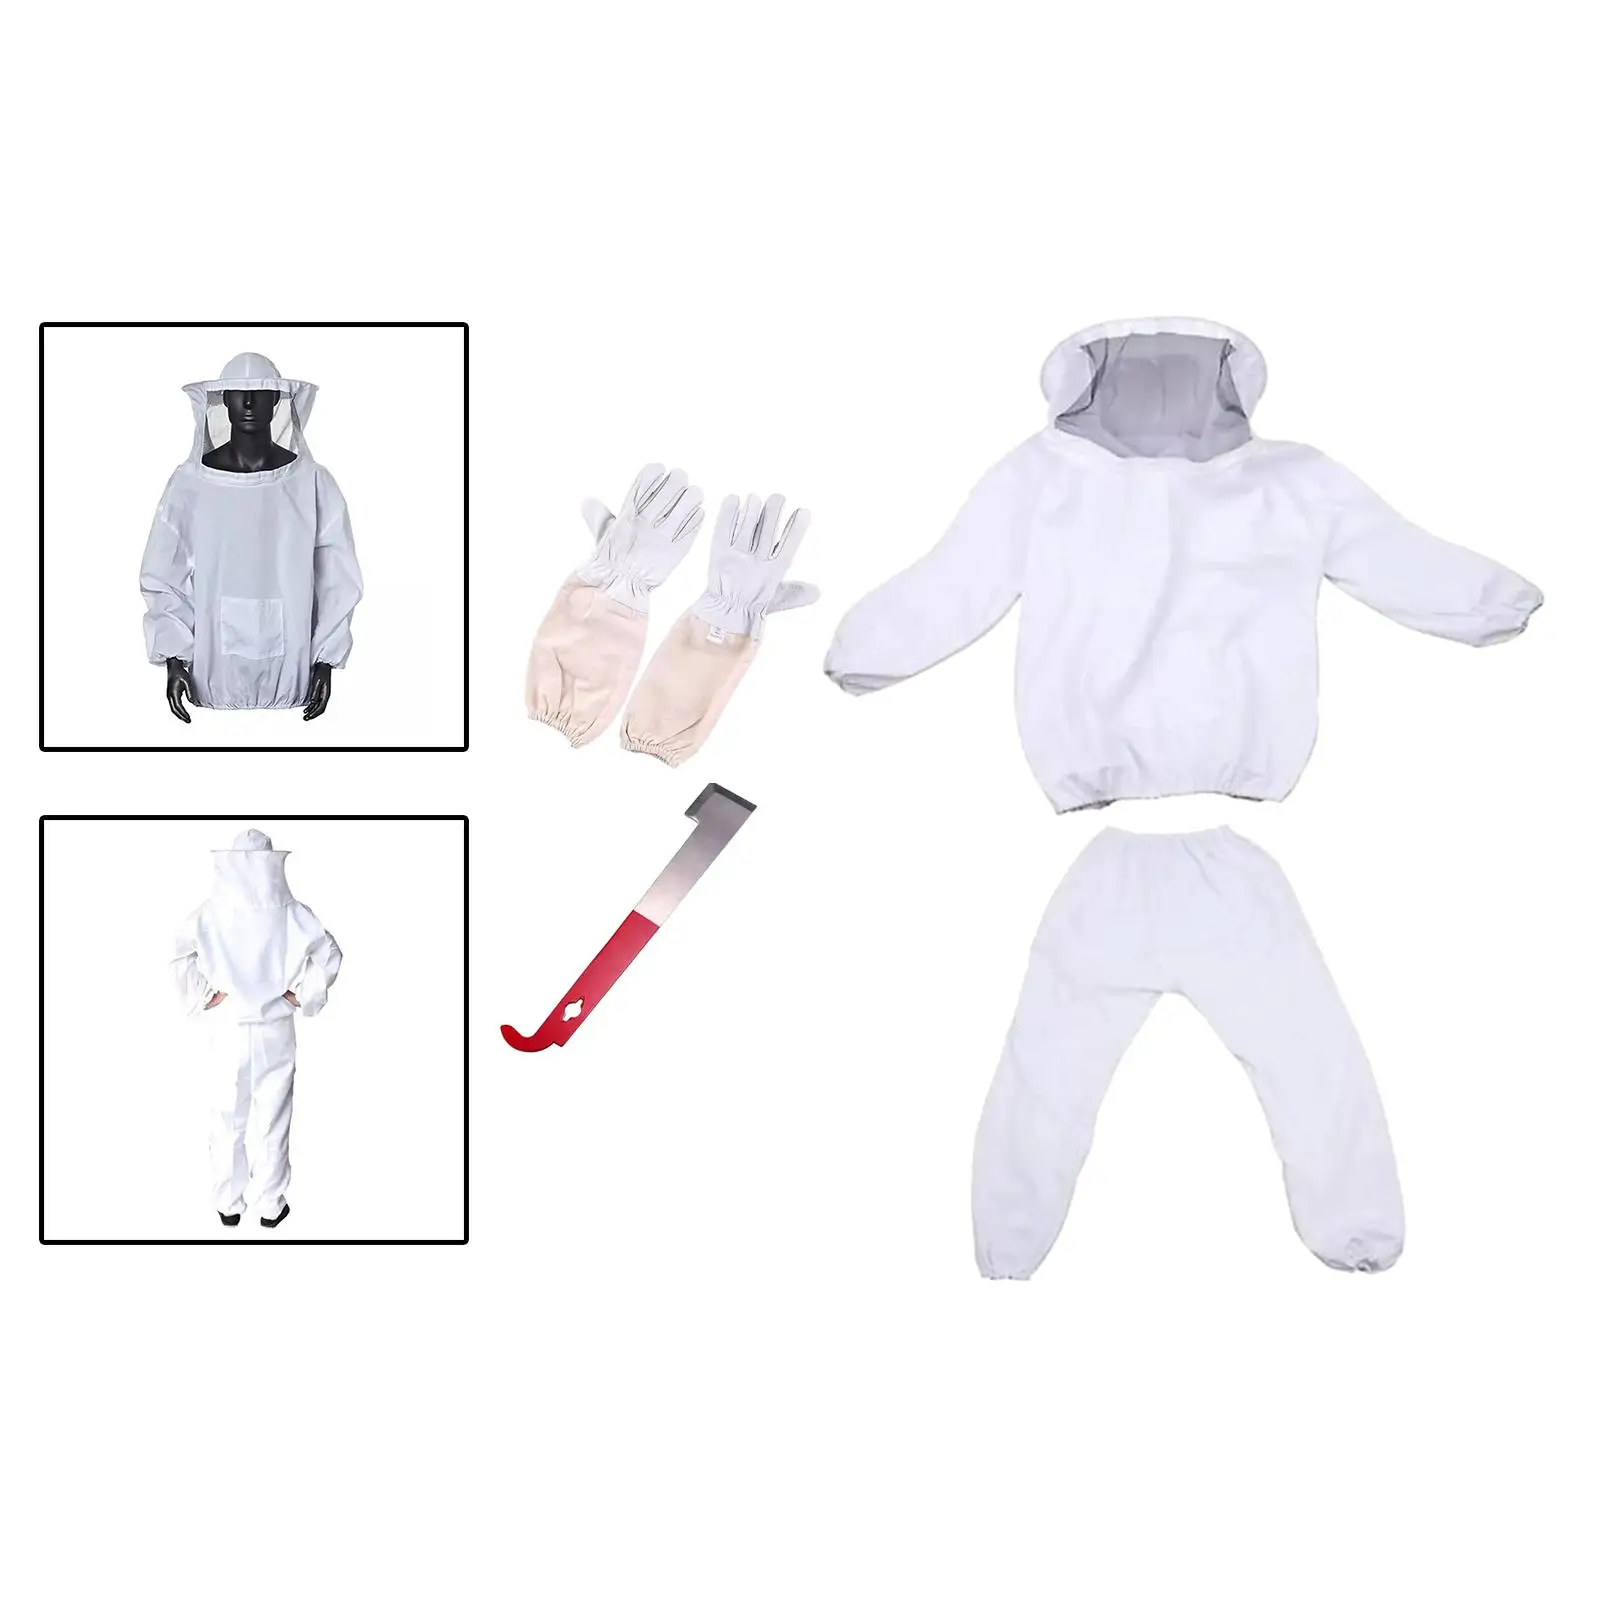 Complete Beekeeping Suit Cotton Protective Equipment Beekeeper Costume Bee Keepers Suit for Male and Female Beginner